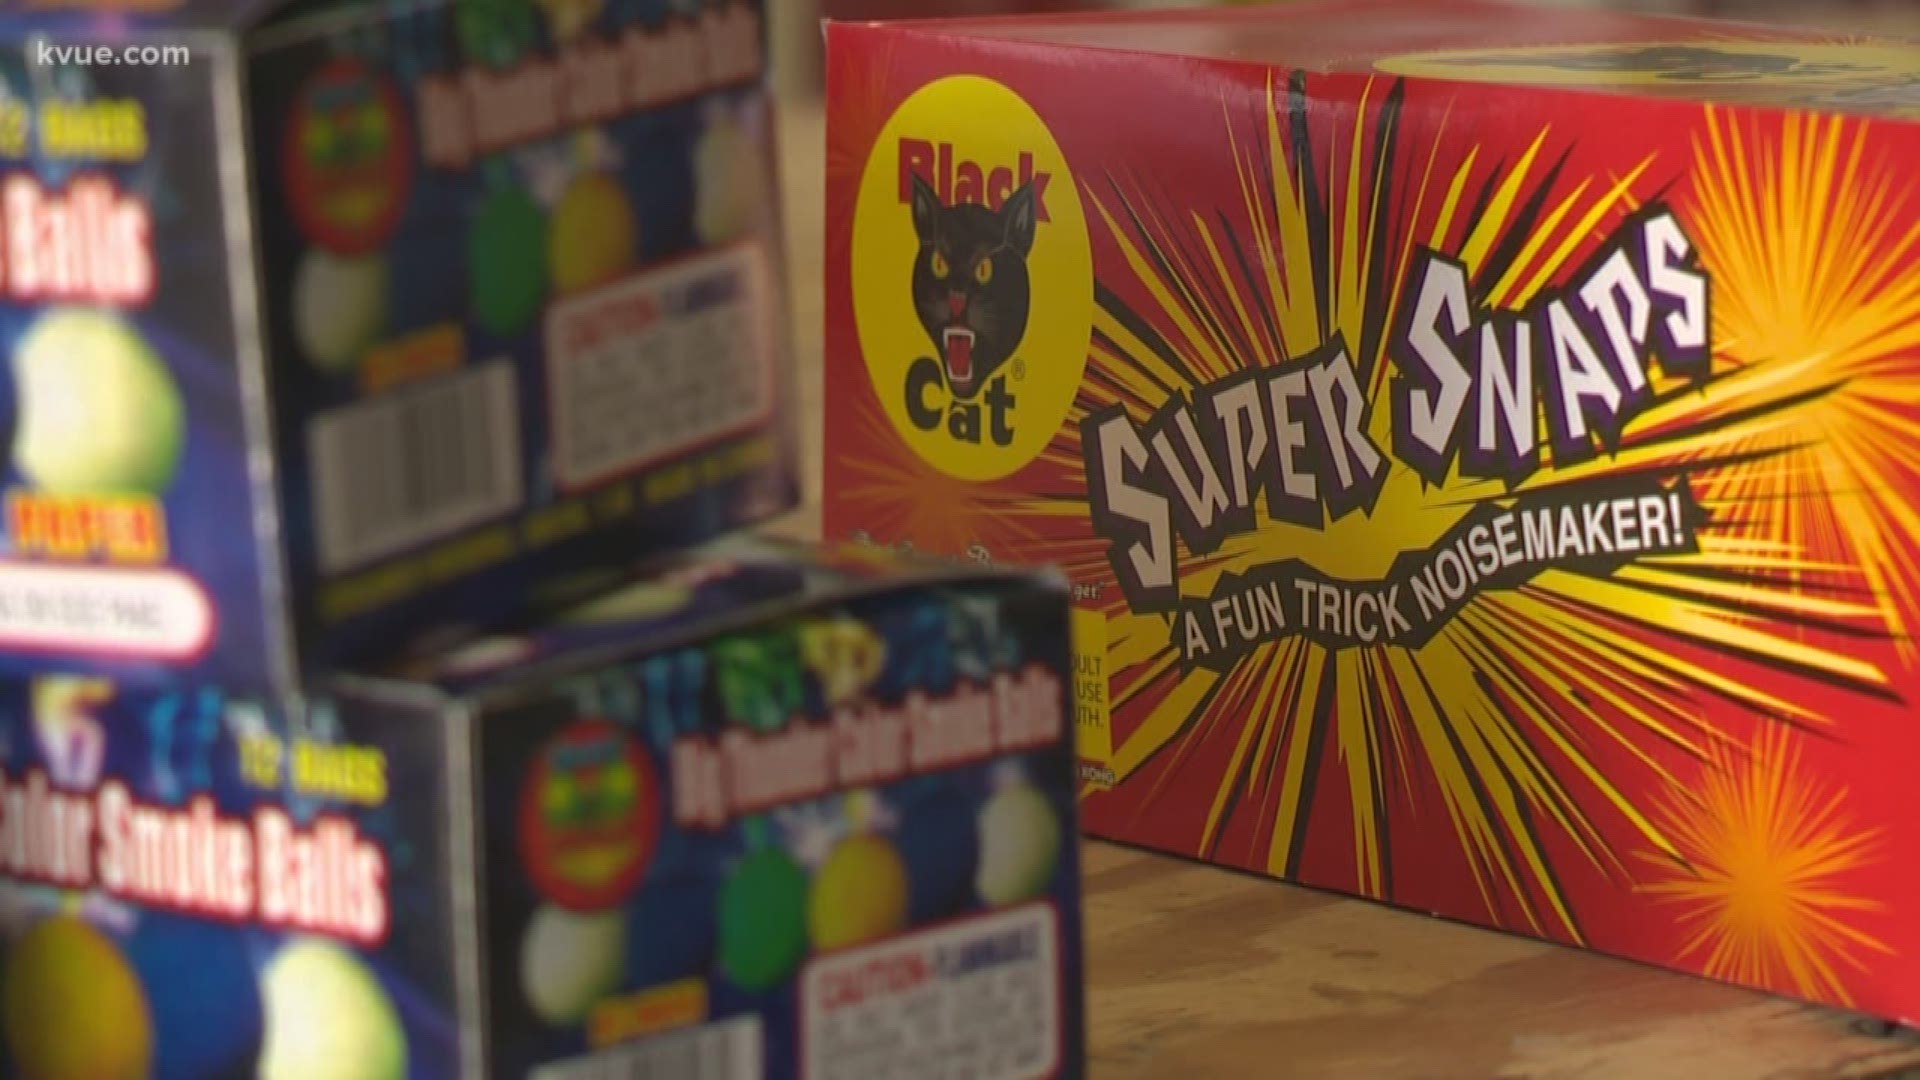 Fireworks on sale, banned in certain areas